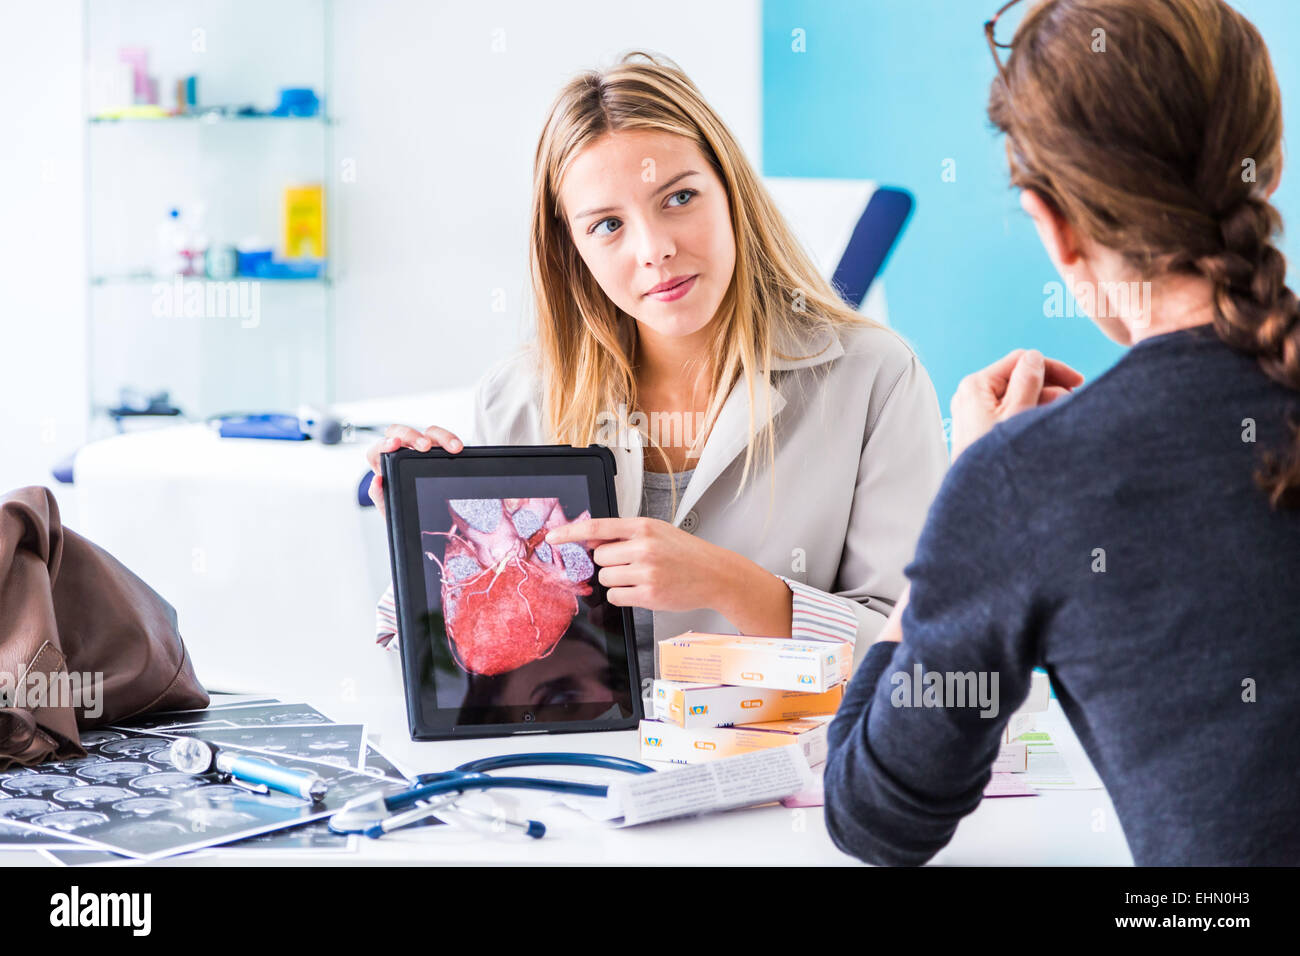 Representative in pharmaceutical products. Stock Photo